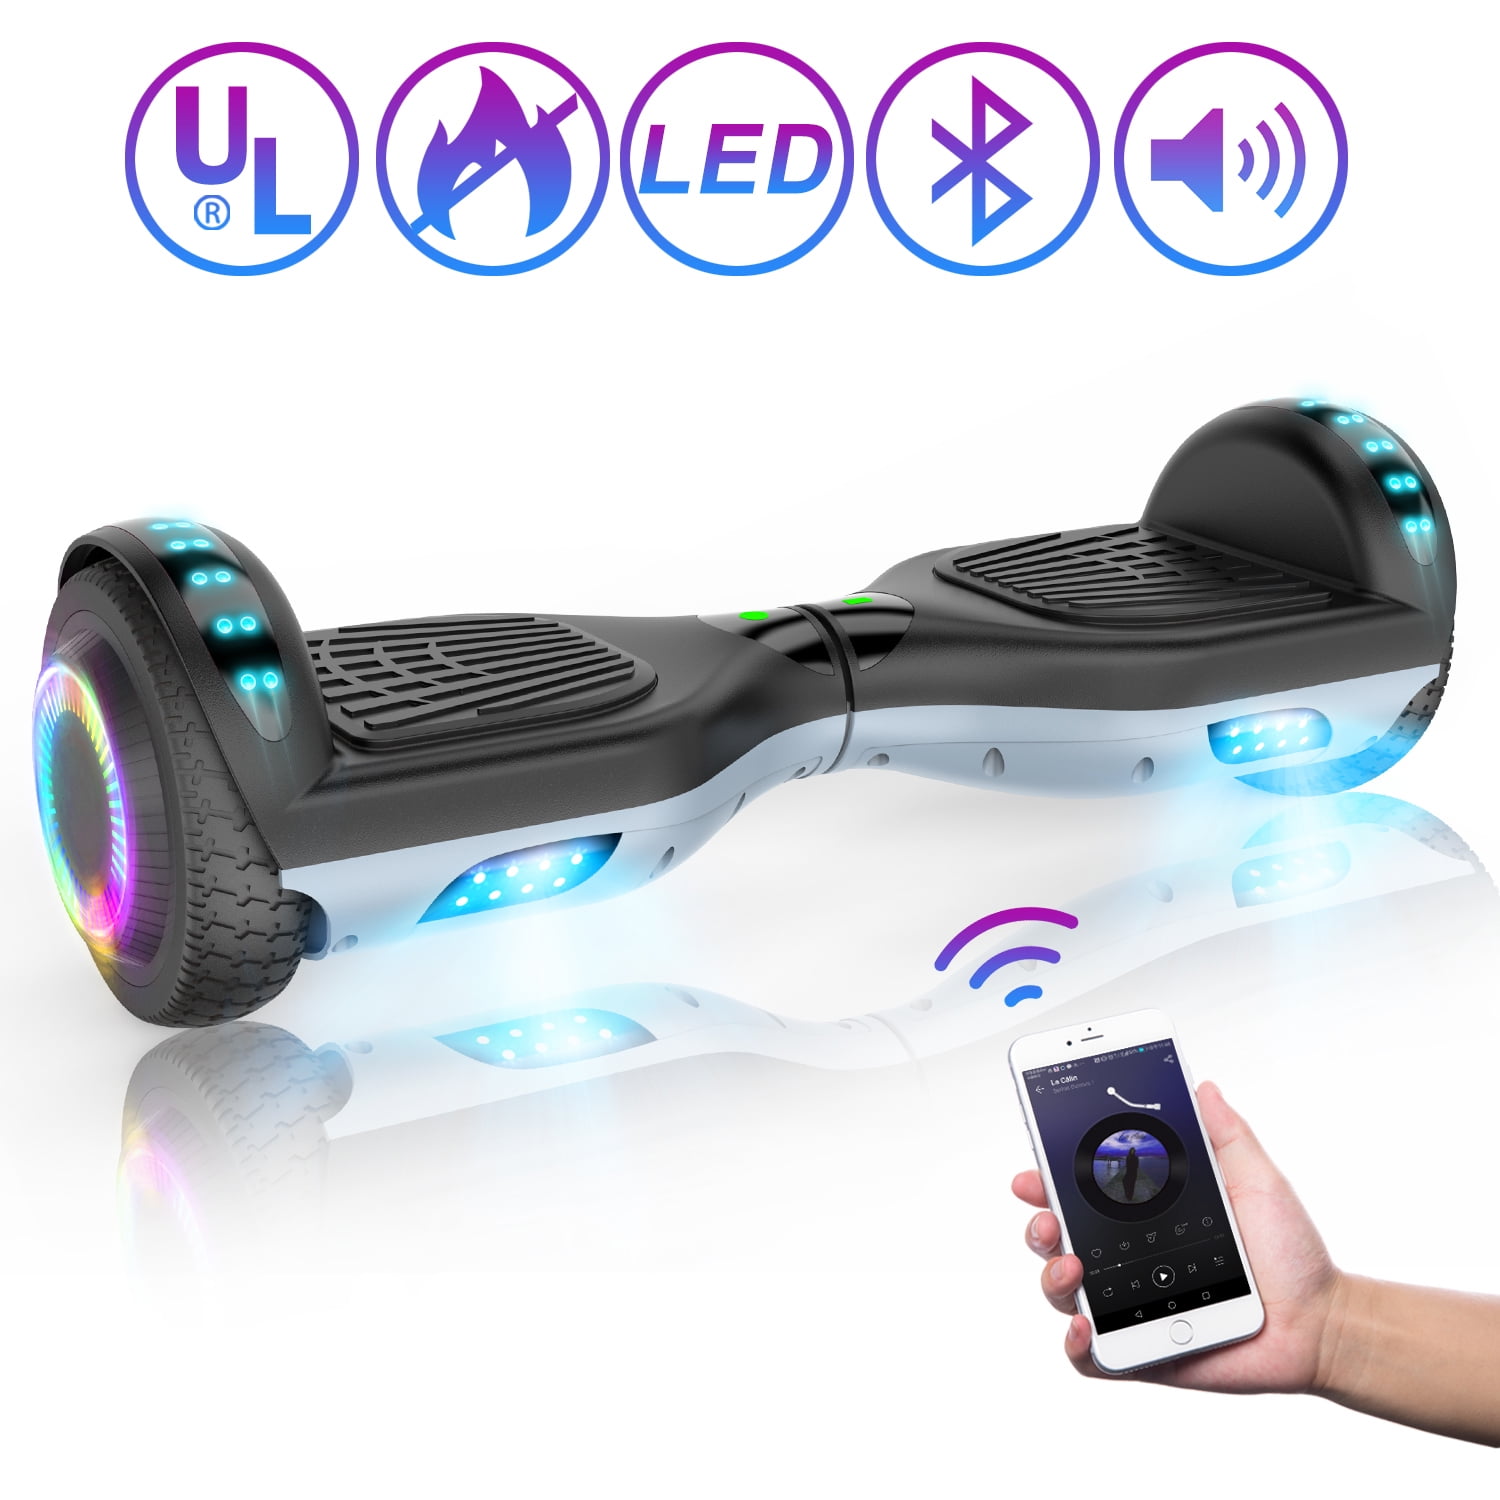 6.5'' Hoverboard Electric Self-Balancing Scooter Hoover board no Bag for  kids